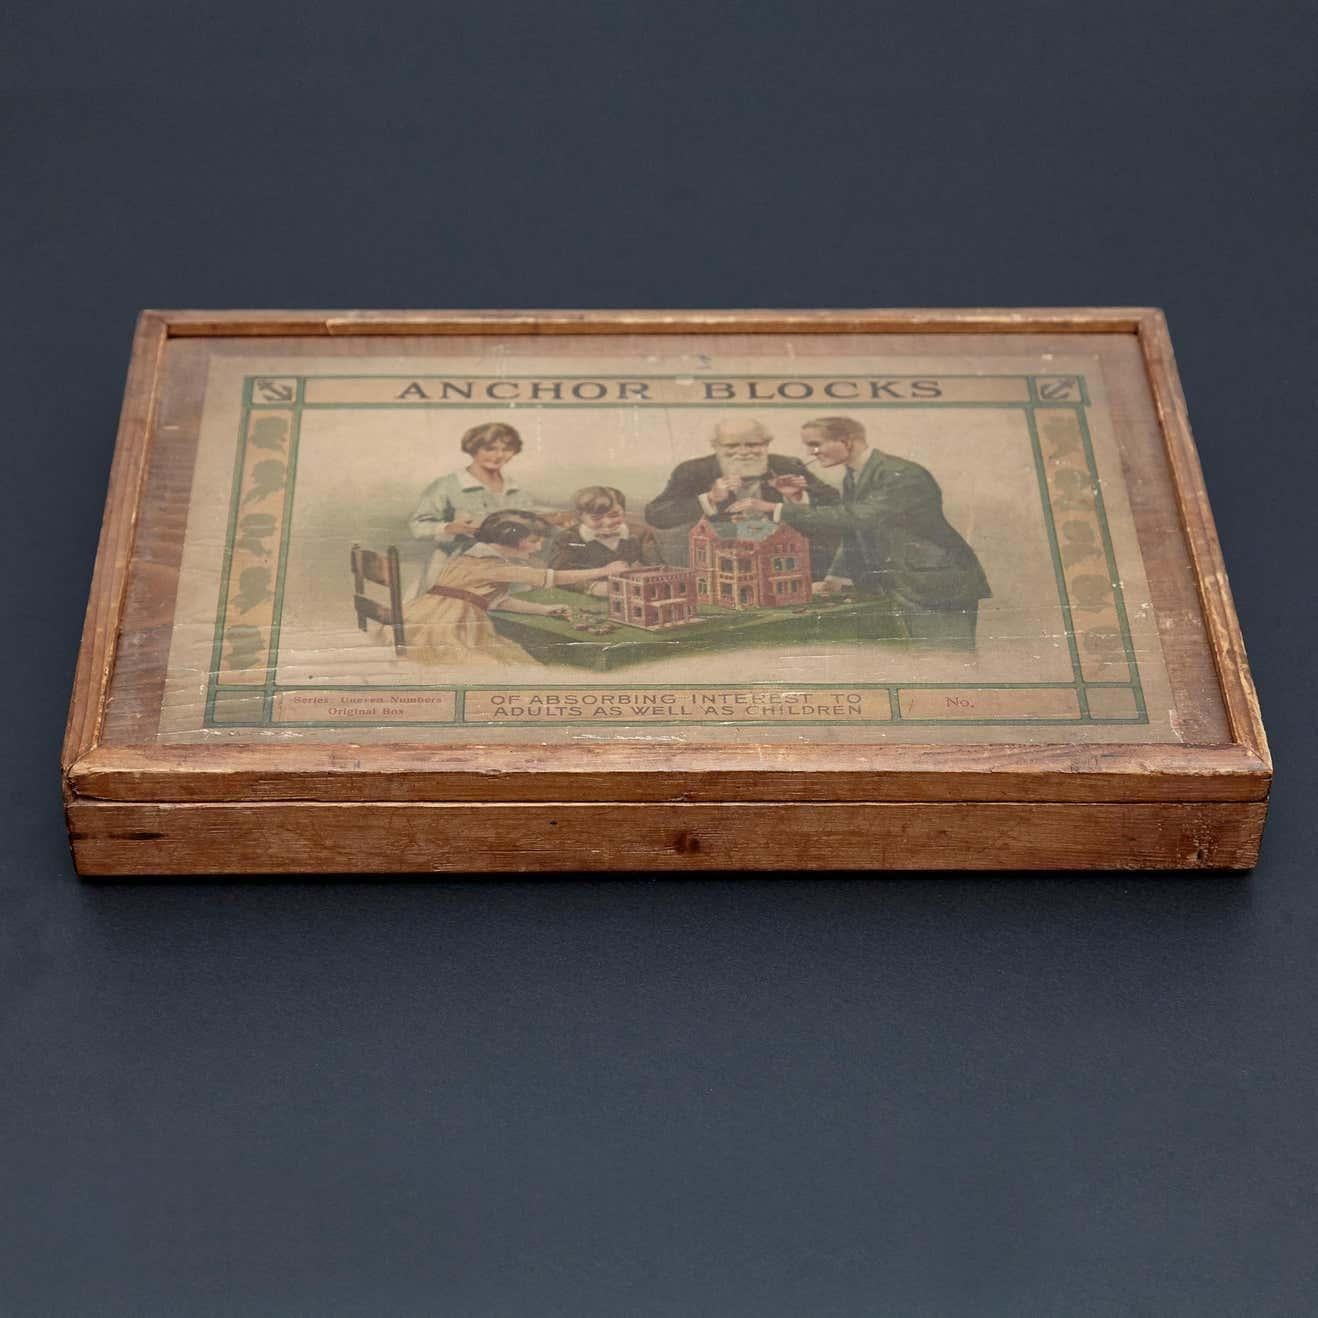 Discover a piece of history with this vintage Richters German anchor blocks building toy, also known as Der Geschickte Baumeister. Made in Rudolstadt, Germany, circa 1900, this set comes in its original wooden box with printed paper labels and